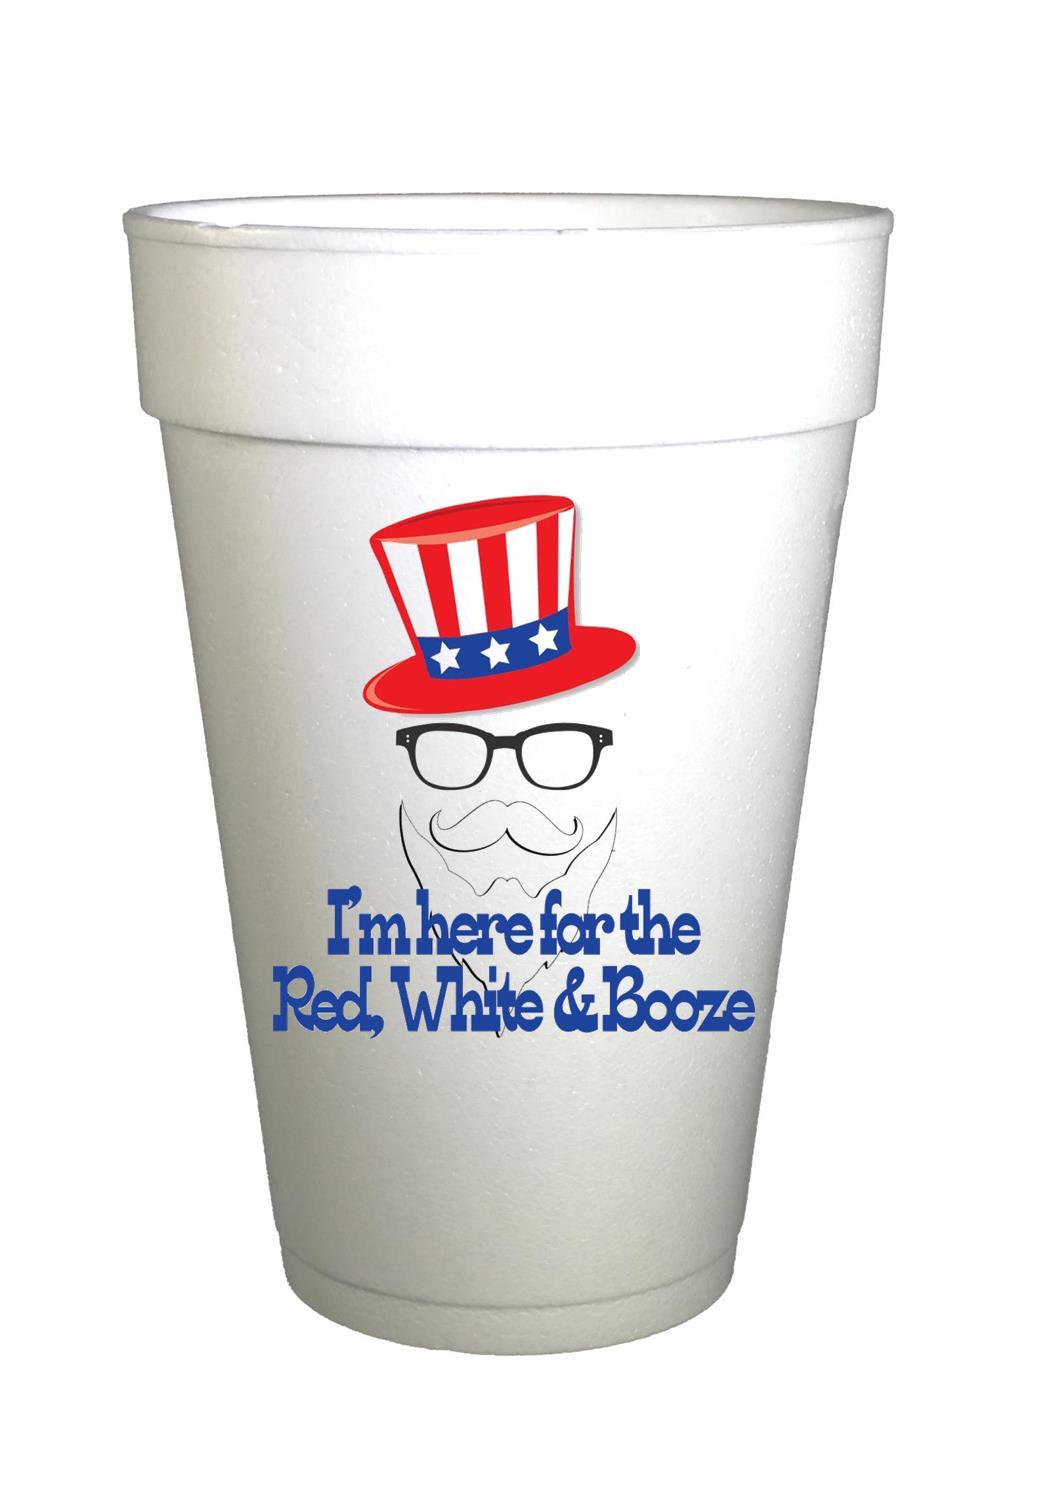 Patriotic Uncle Same with Red White and Booze written on cup